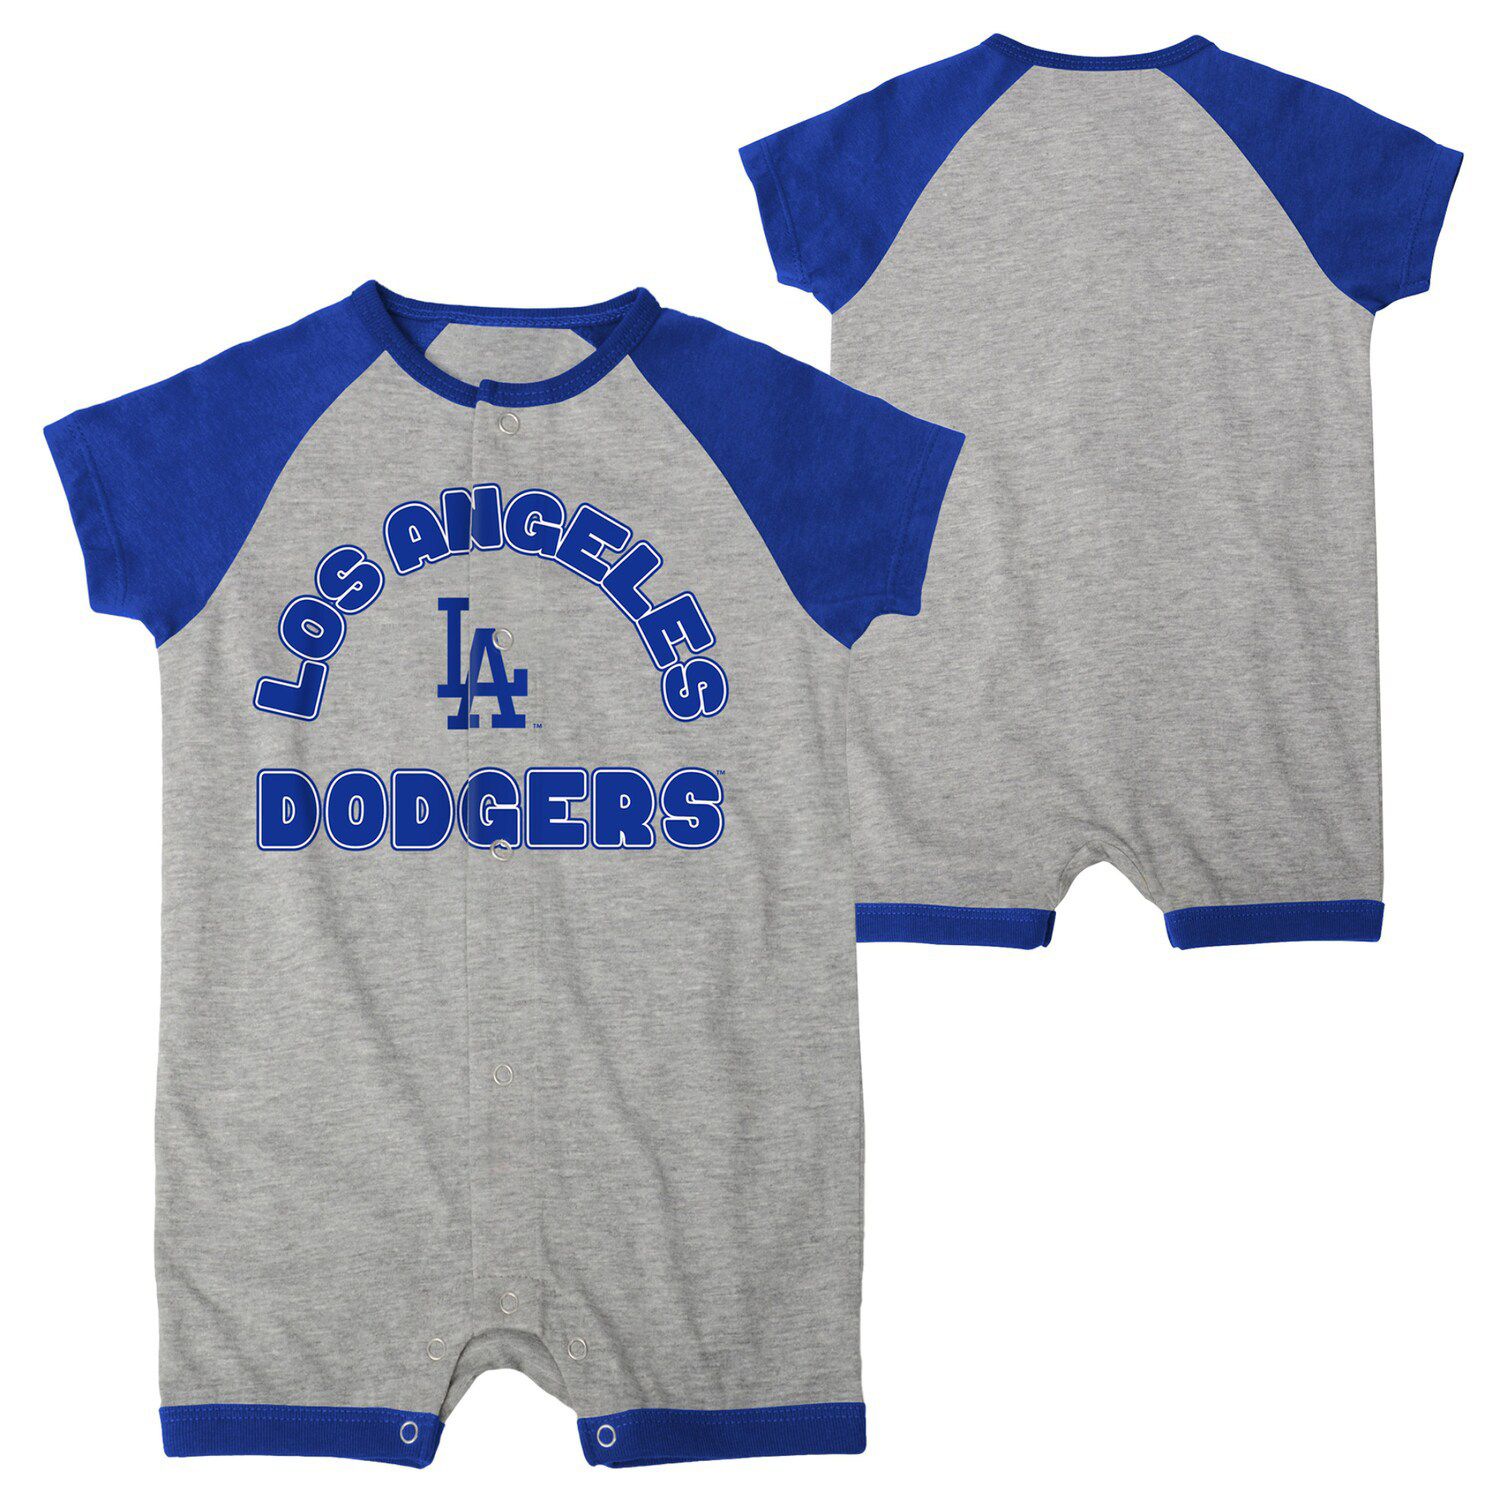 Outerstuff Girls Newborn & Infant Royal/Heathered Gray Los Angeles Dodgers Scream & Shout Two-Pack Bodysuit Set